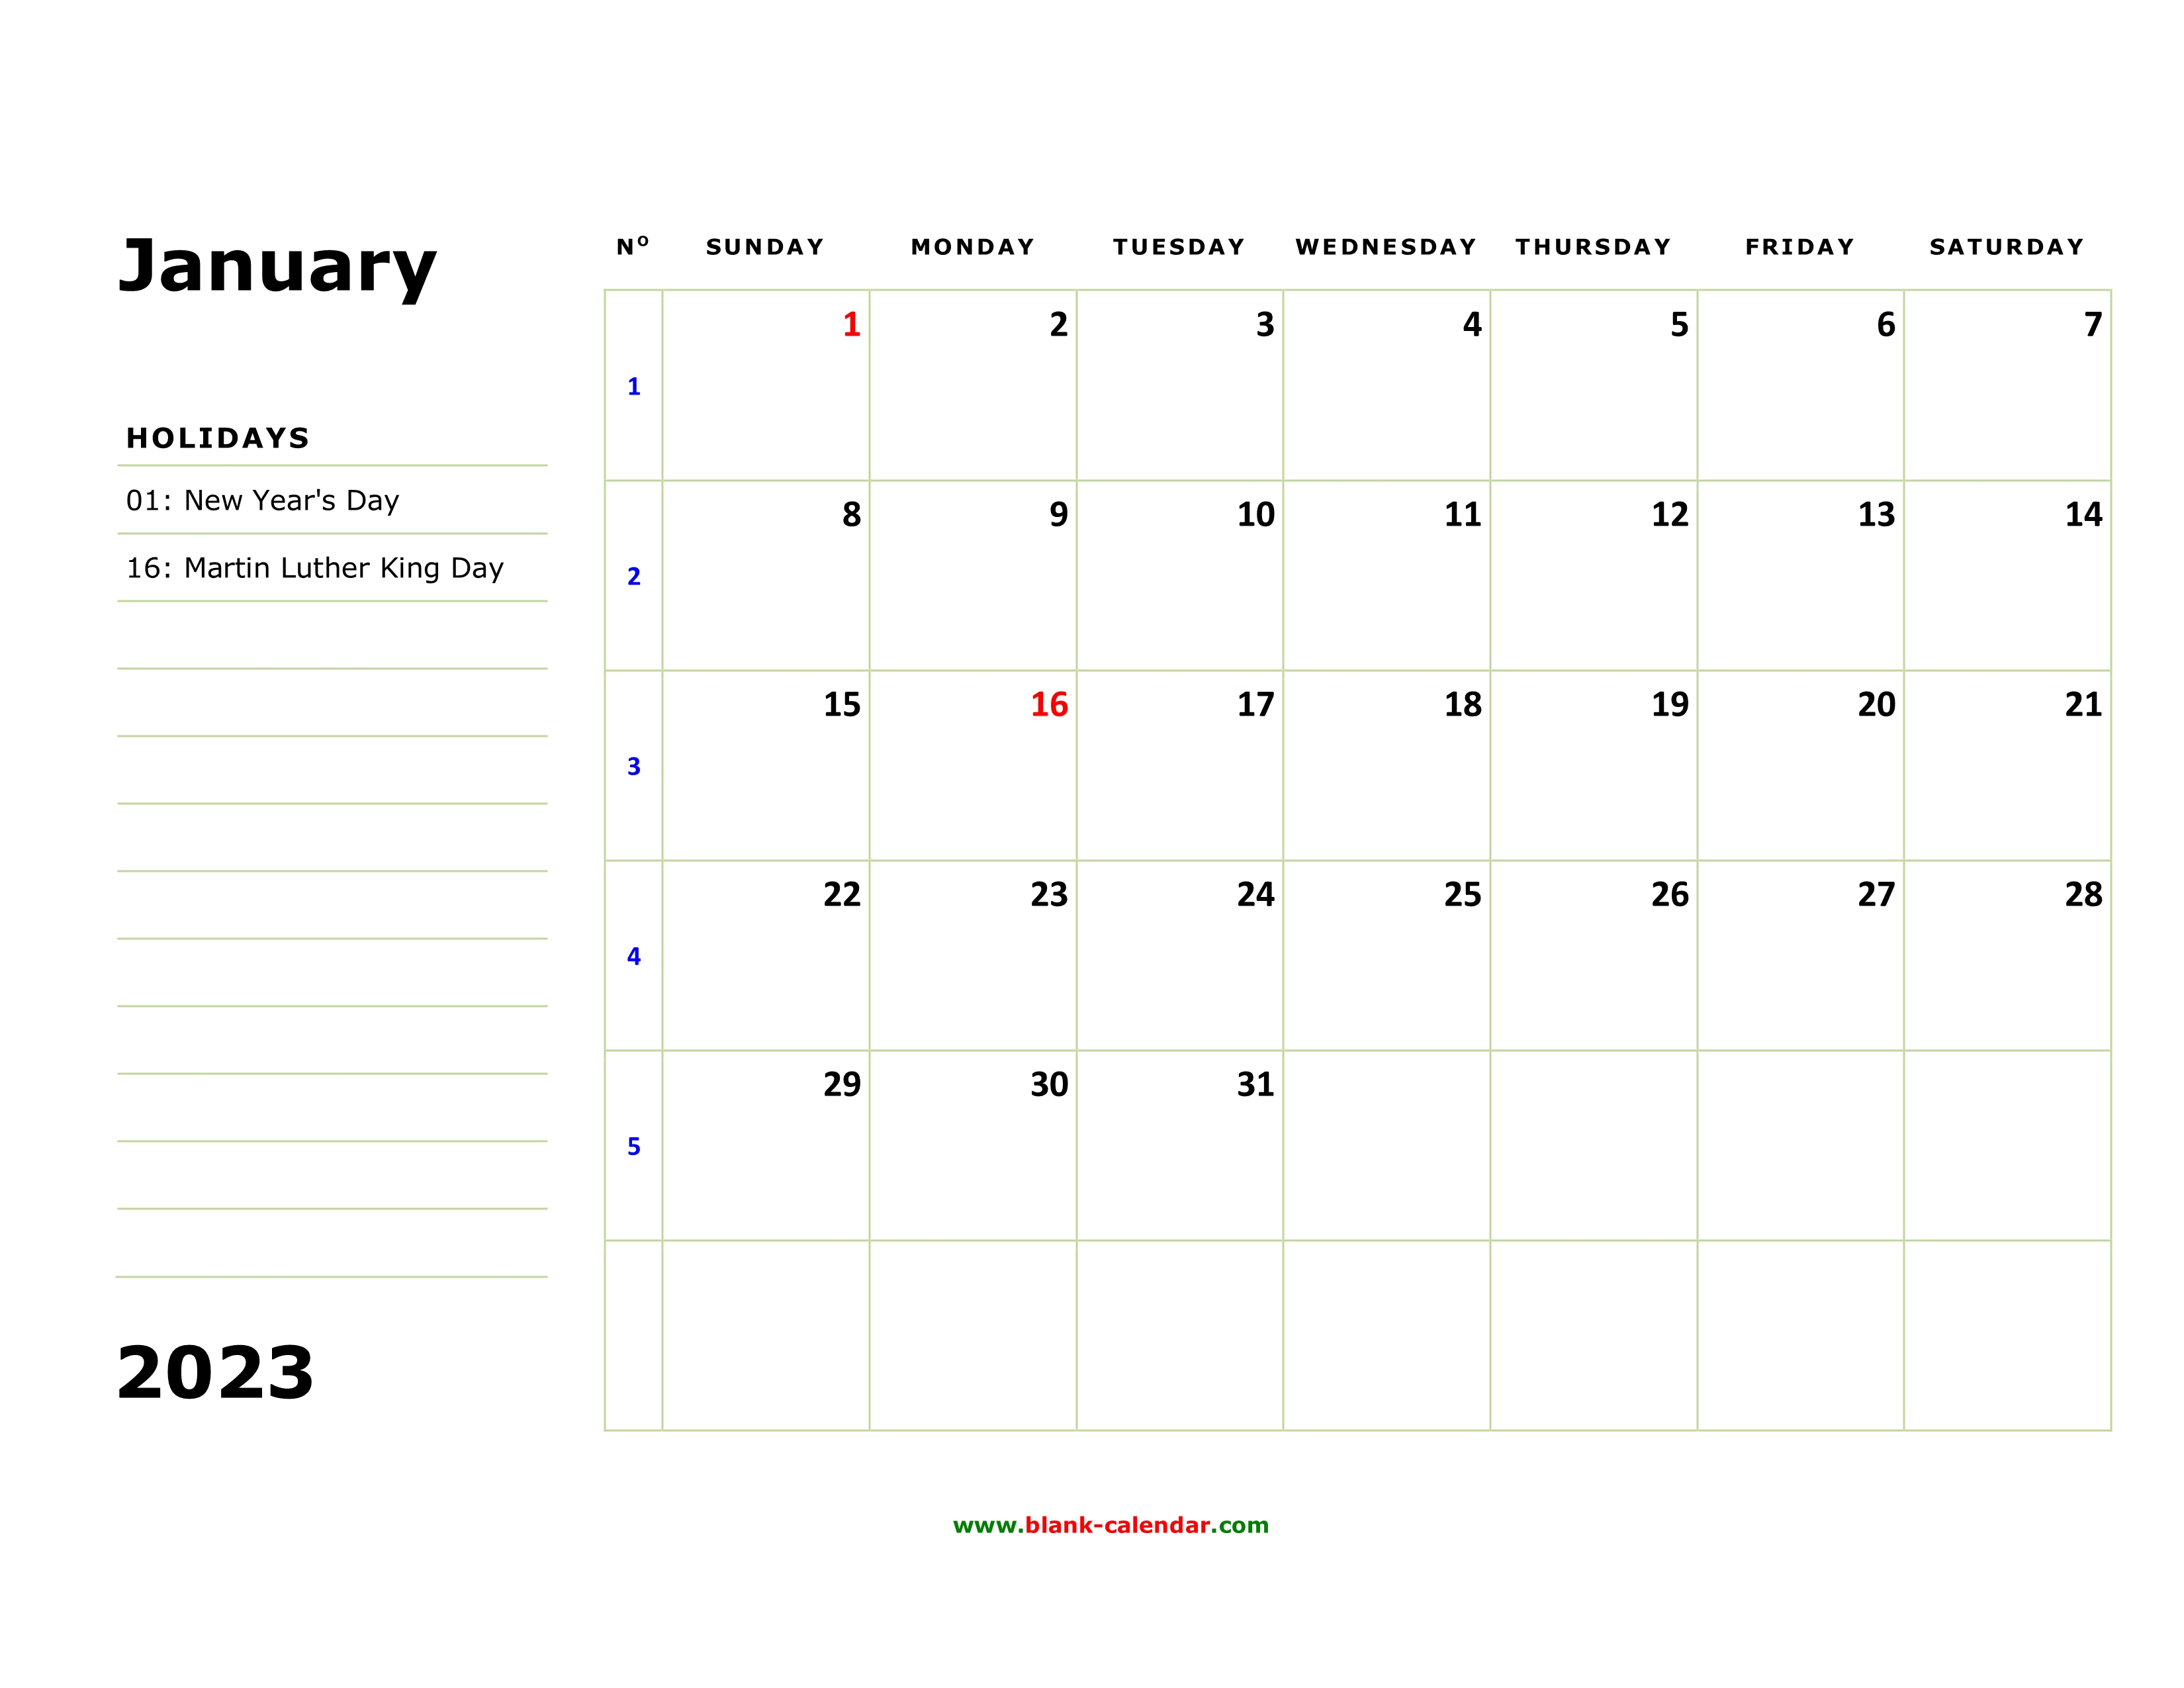 free-download-printable-calendar-2023-large-box-holidays-listed-space-for-notes